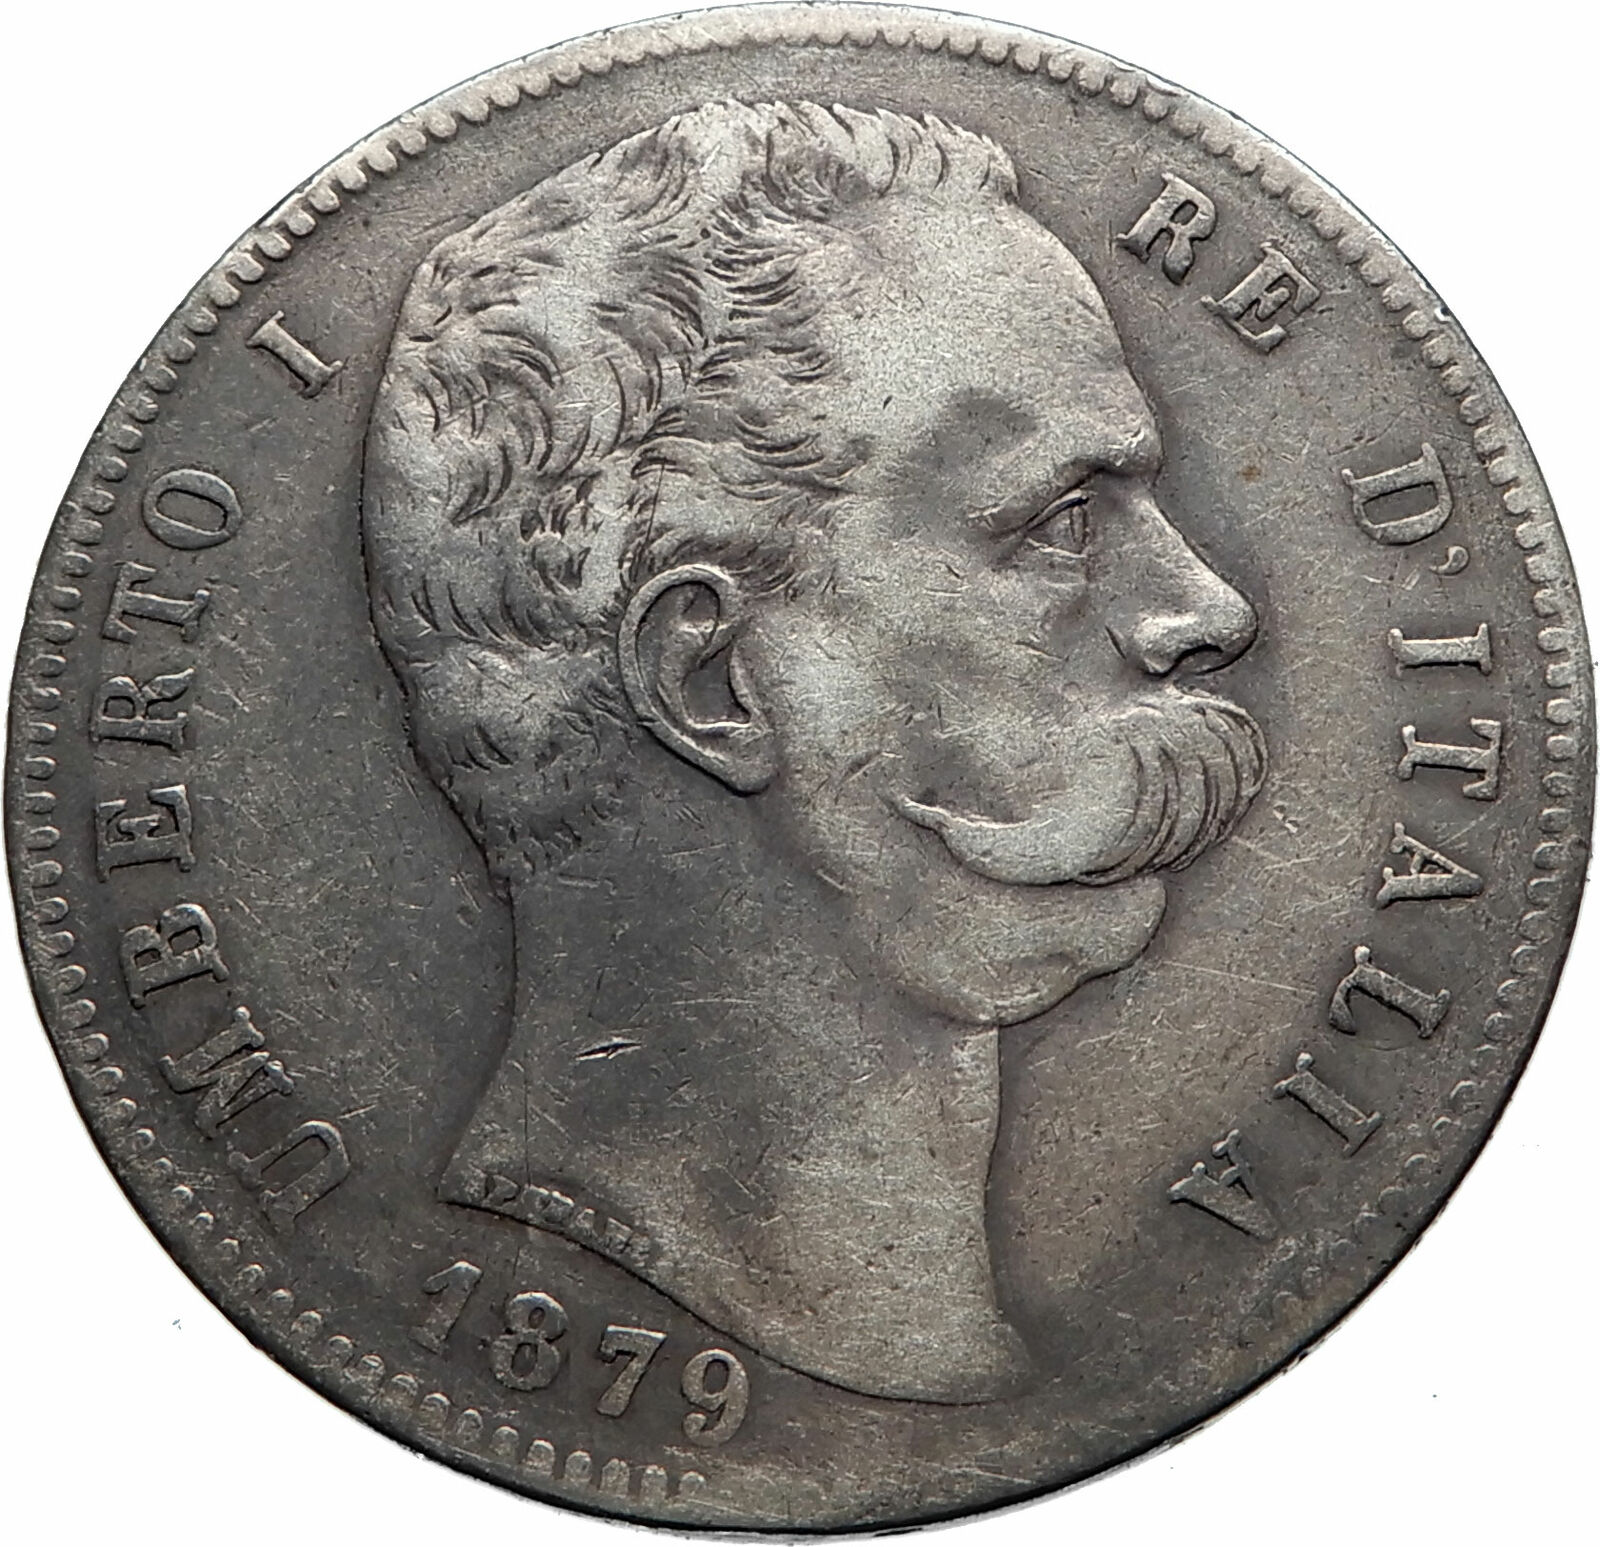 1879 ITALY with King Umberto I Genuine Antique Silver 5 Lire Italian Coin i74874